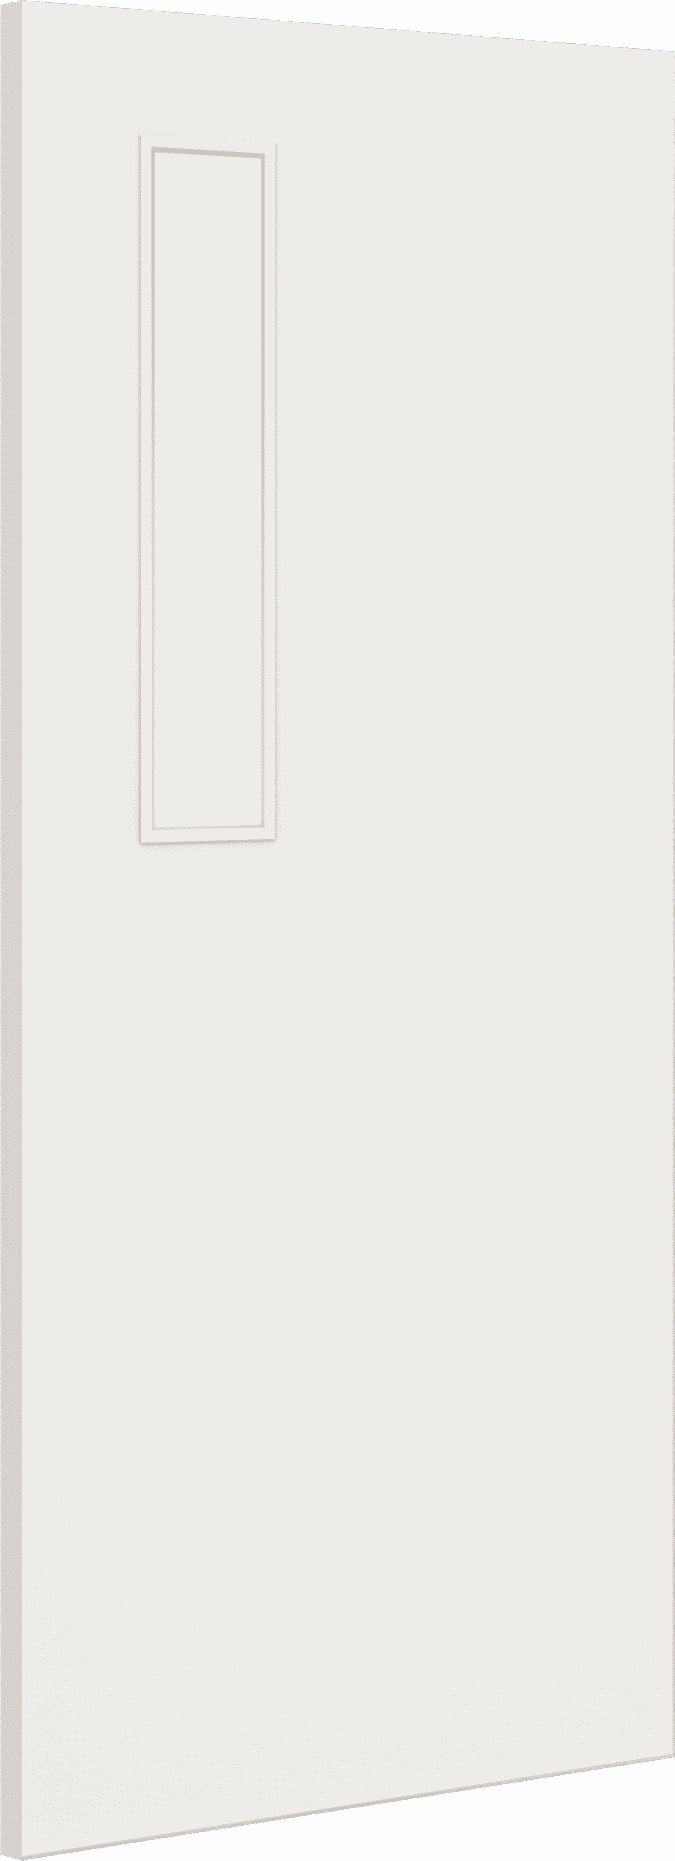 1981mm x 610mm x 44mm (24") Architectural Paint Grade White 08 Frosted Glazed Fire Door Blank